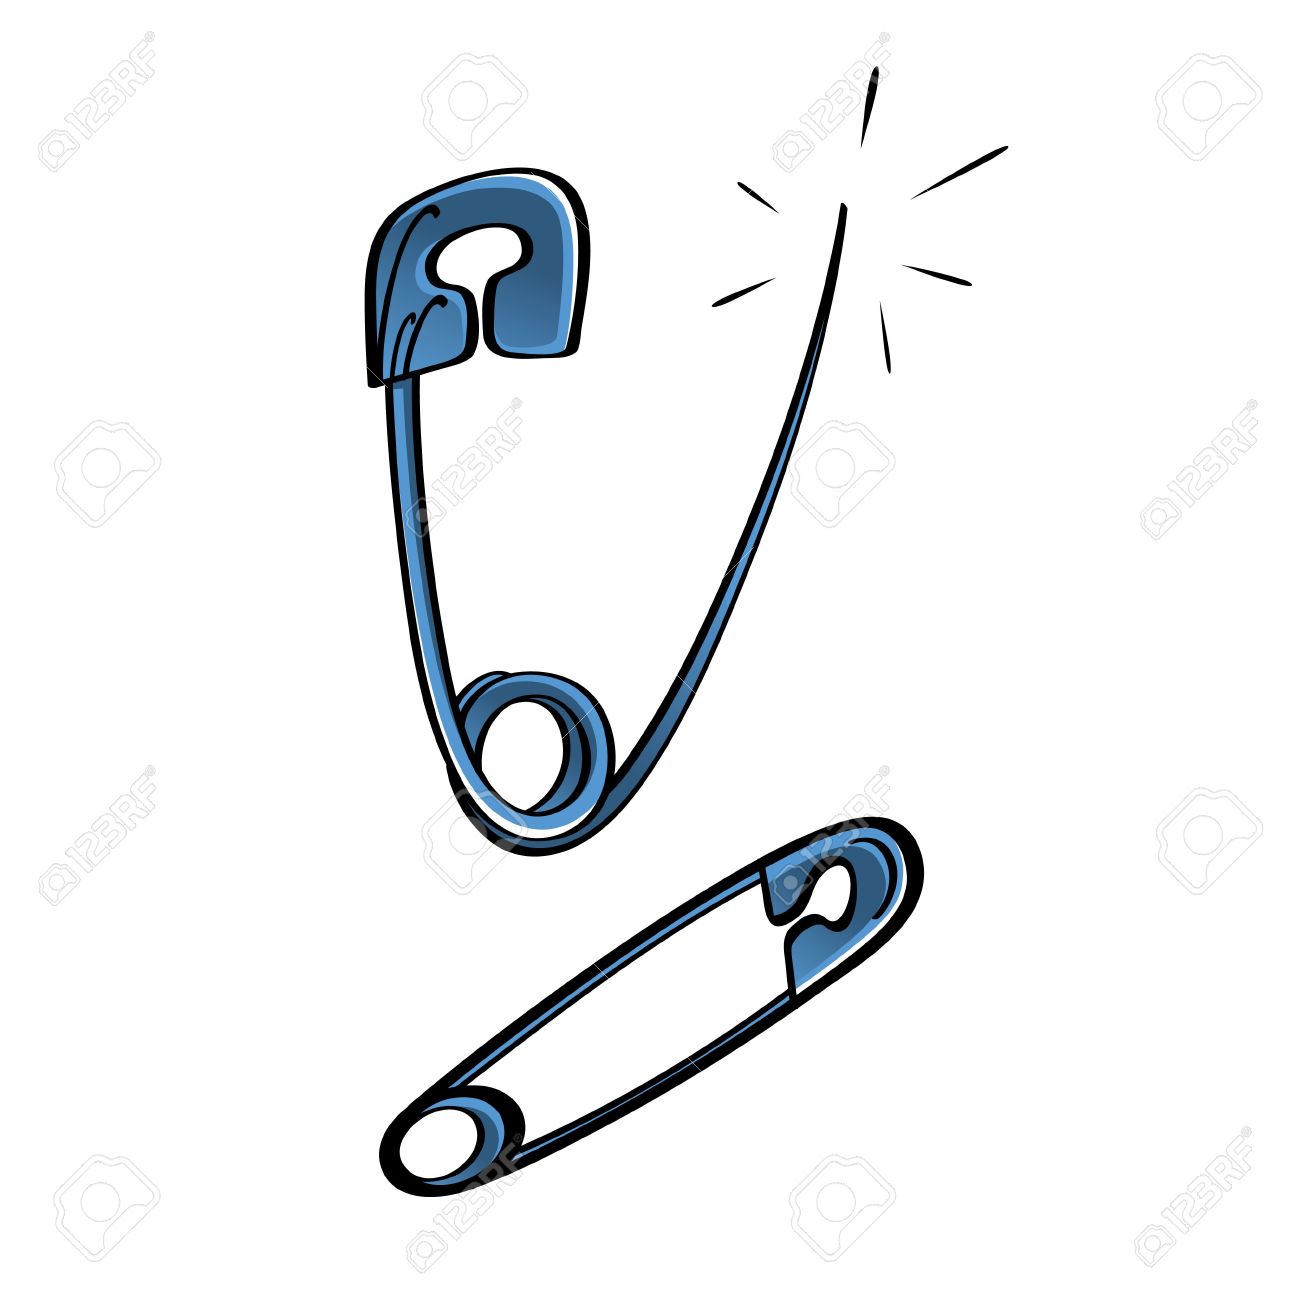 Safety Pin Sharp Steel Prick Royalty Free Cliparts, Vectors, And.